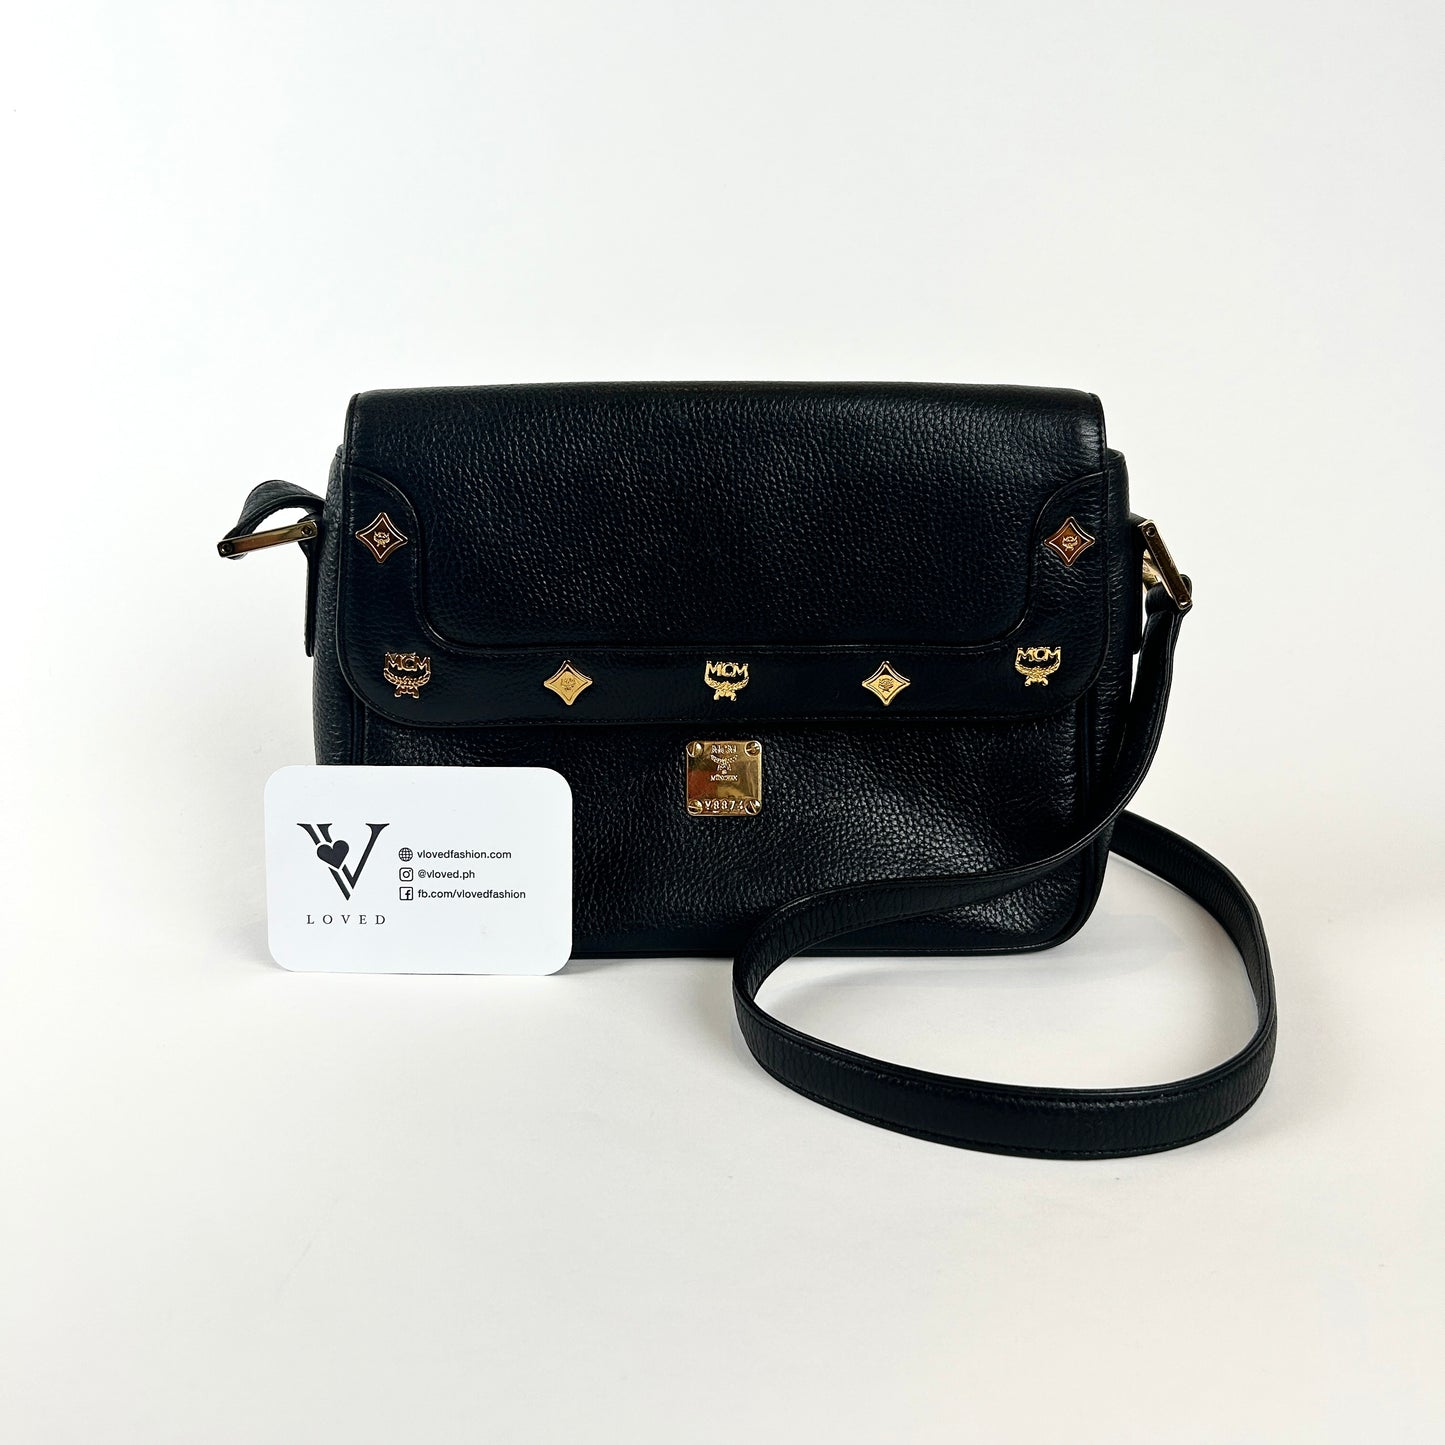 Leather Crossbody Bag in Black Leather